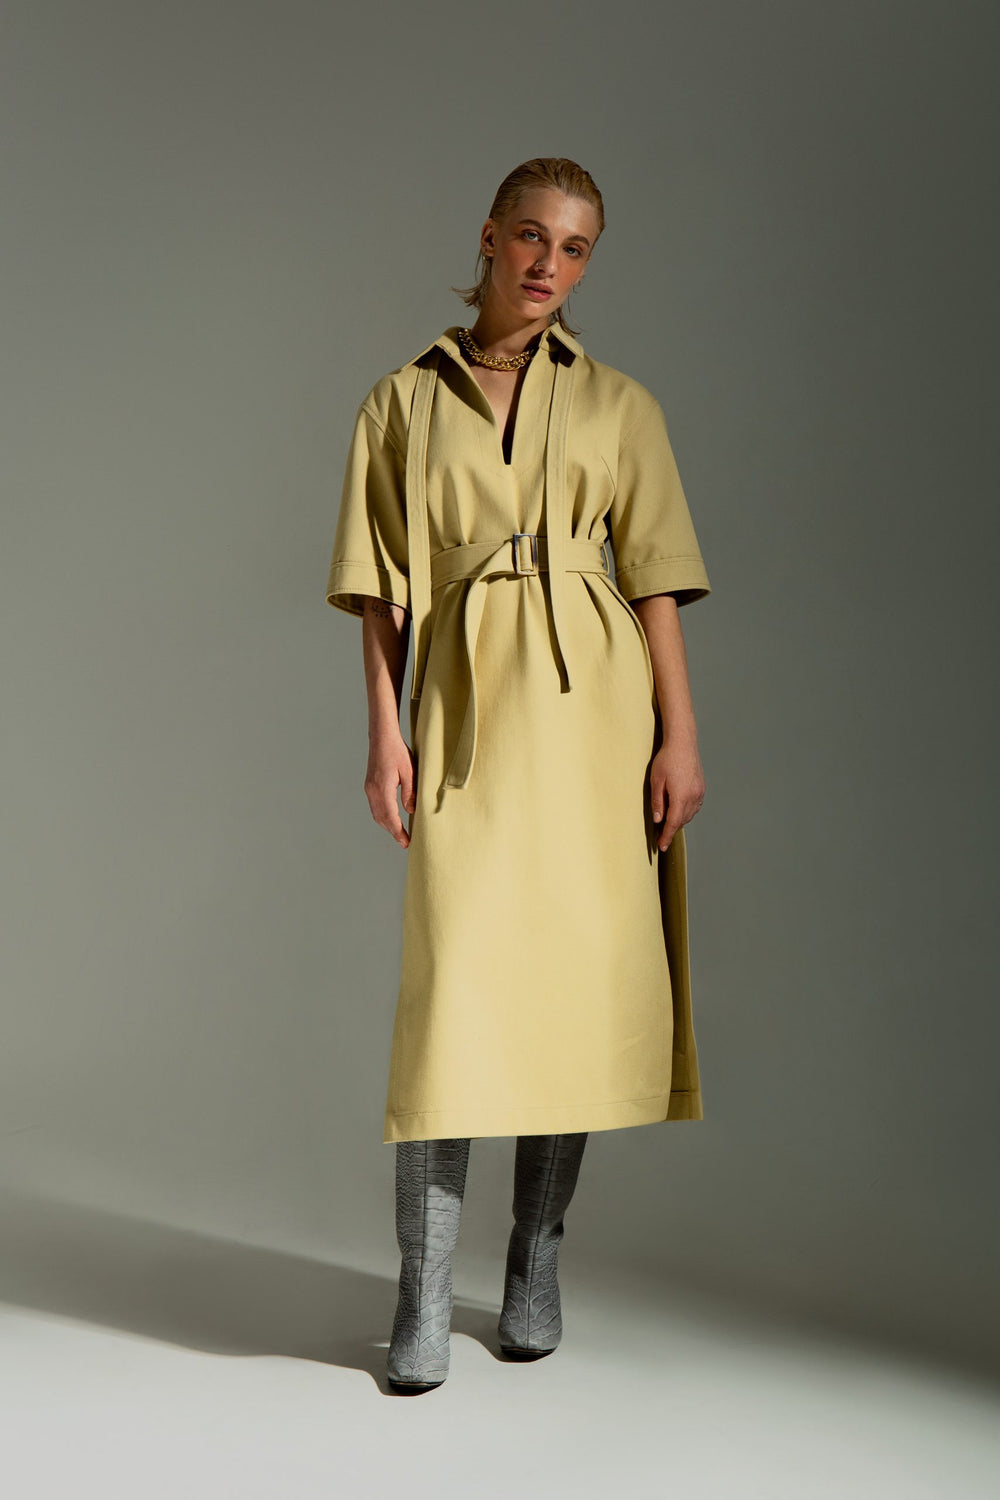 Woman wearing the Helen Dress sewing pattern from Vikisews on The Fold Line. A dress pattern made in wool, gabardine, denim, fine wale corduroy, corduroy, faux leather or suede fabrics, featuring a relaxed fit with straight silhouette, detachable belt wit